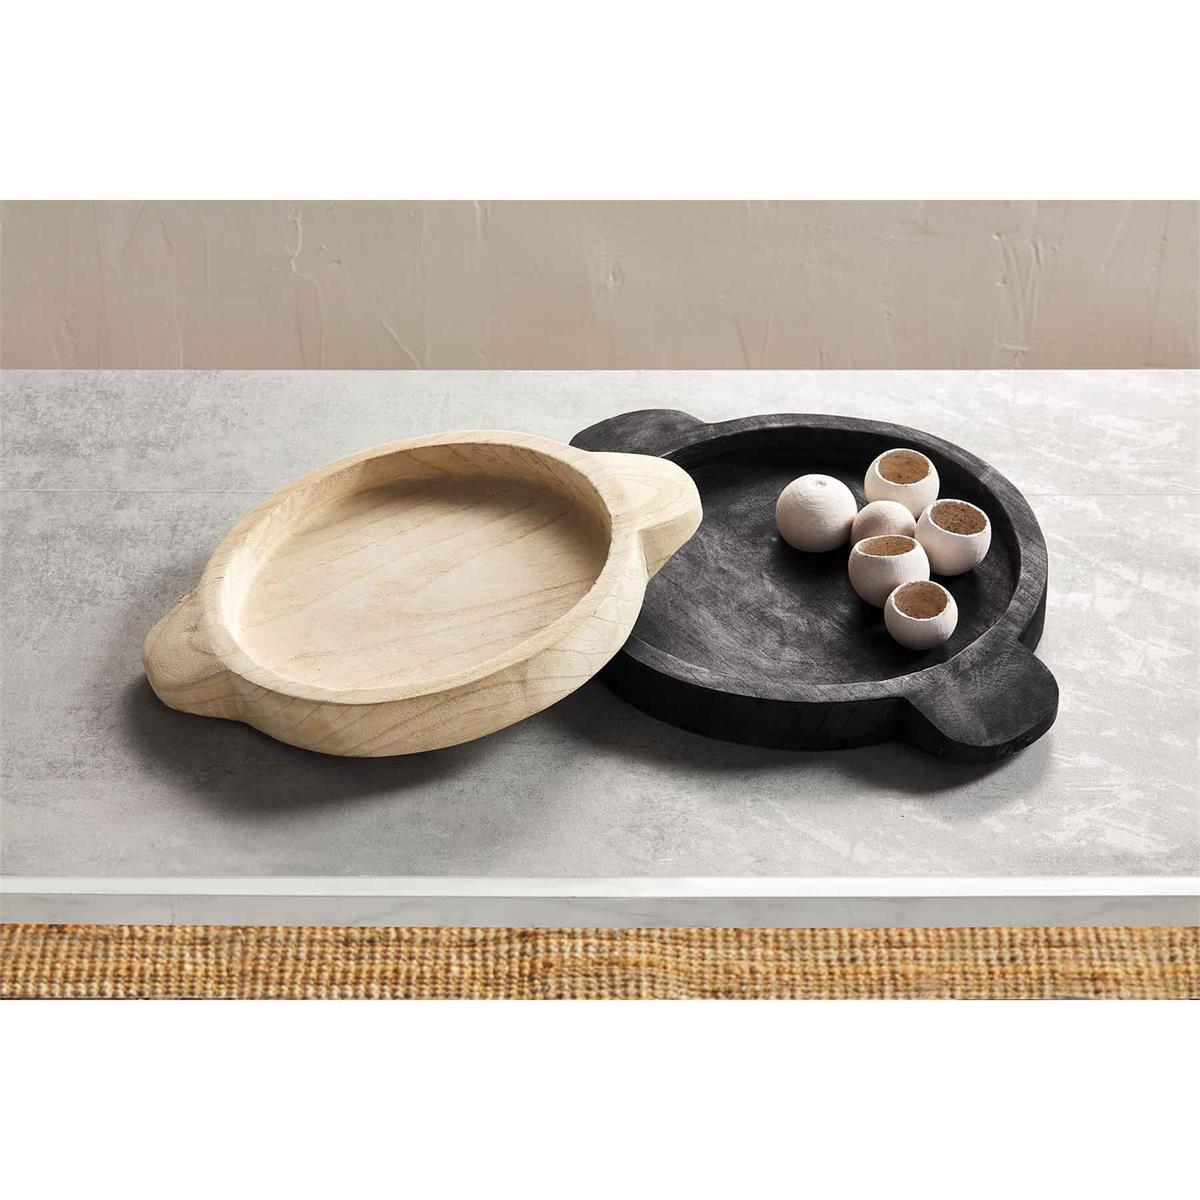 one black and one white round wood tray with handles on a light gray surface 